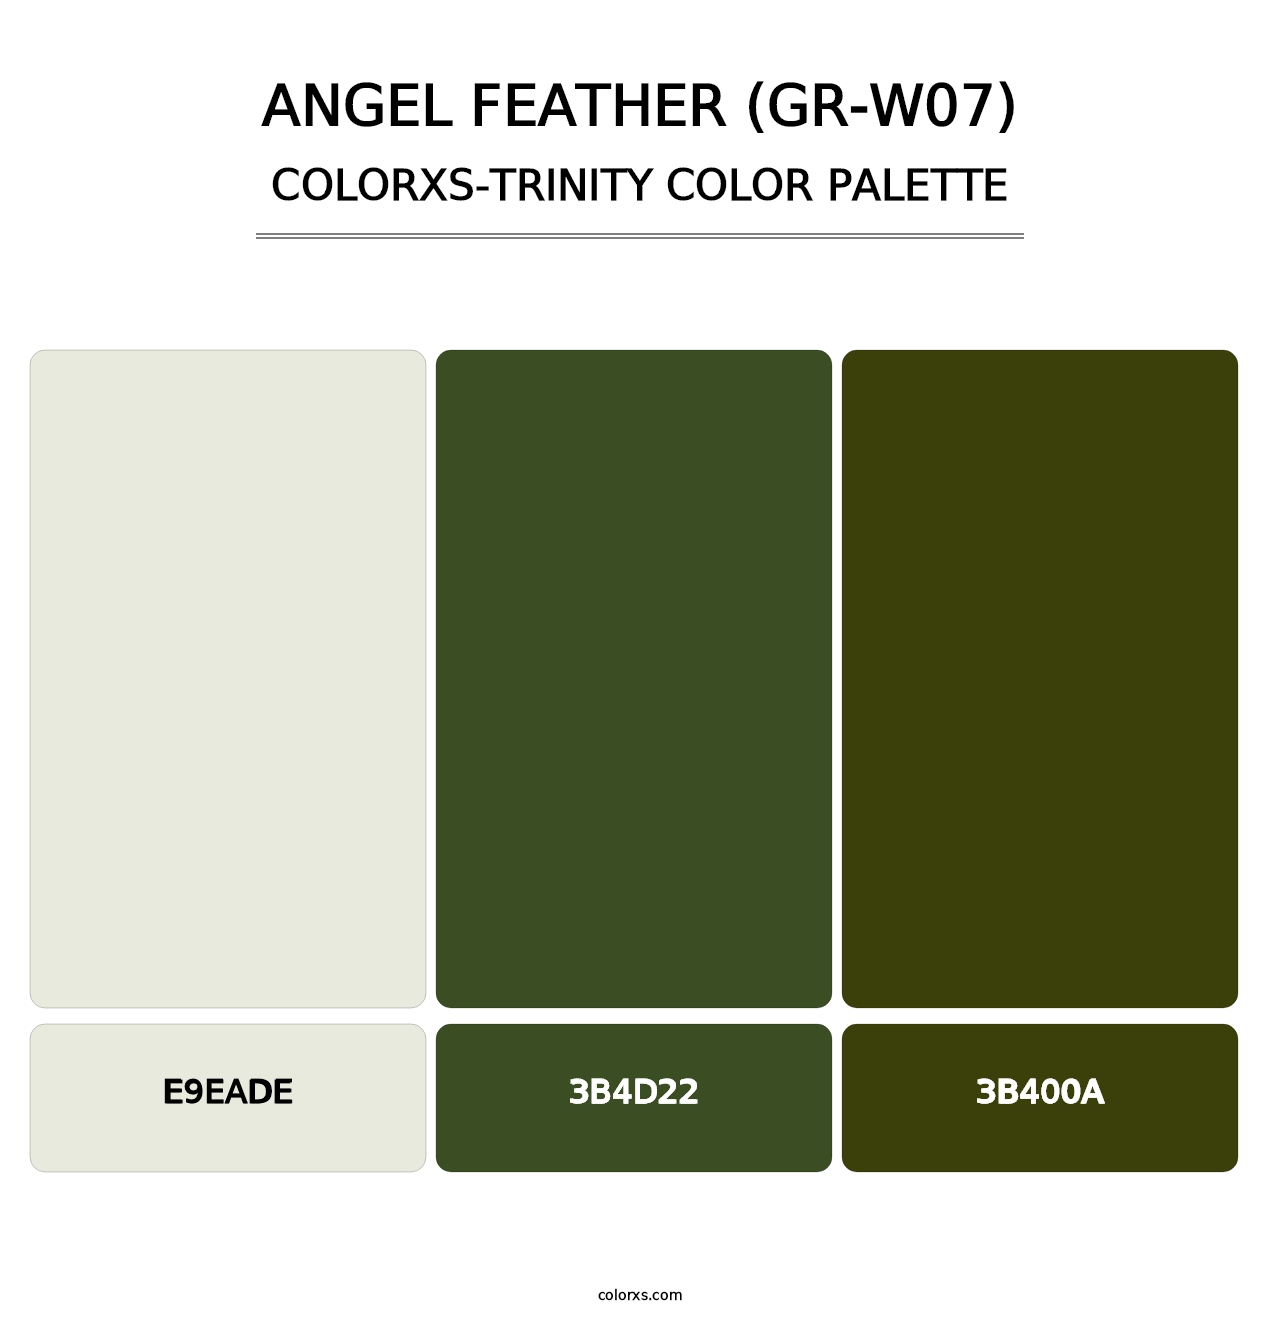 Angel Feather (GR-W07) - Colorxs Trinity Palette